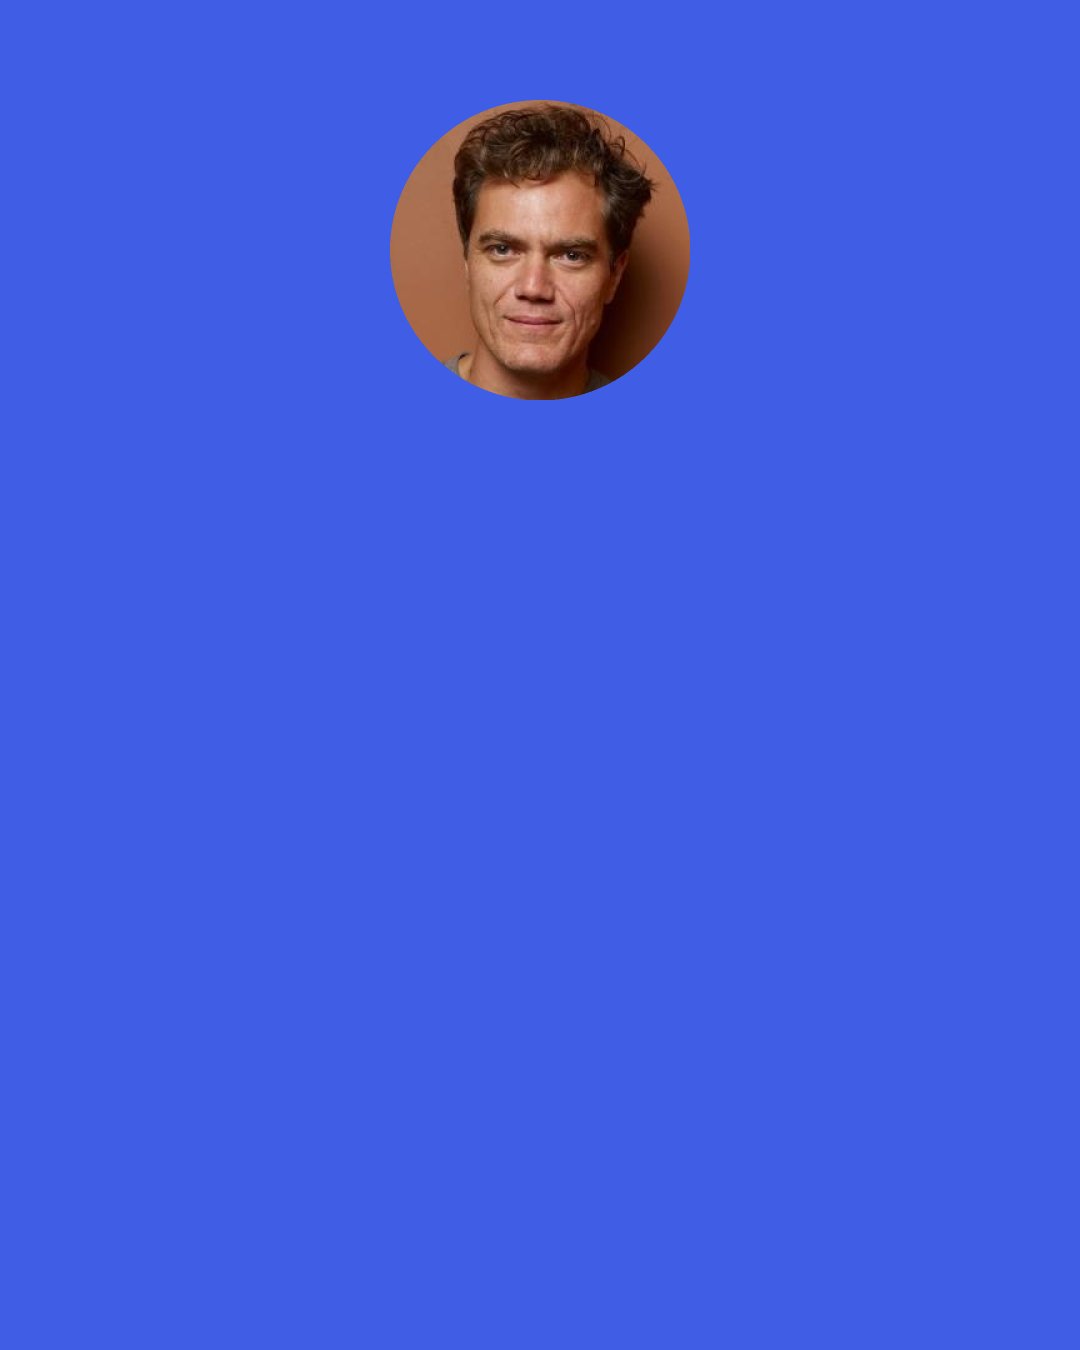 Michael Shannon: It is surprising that people are snapping photos and stuff and then putting them on the internet. For me, it is like, "Why would you want to do that?" It would be like knowing what your Christmas presents were before Christmas morning.